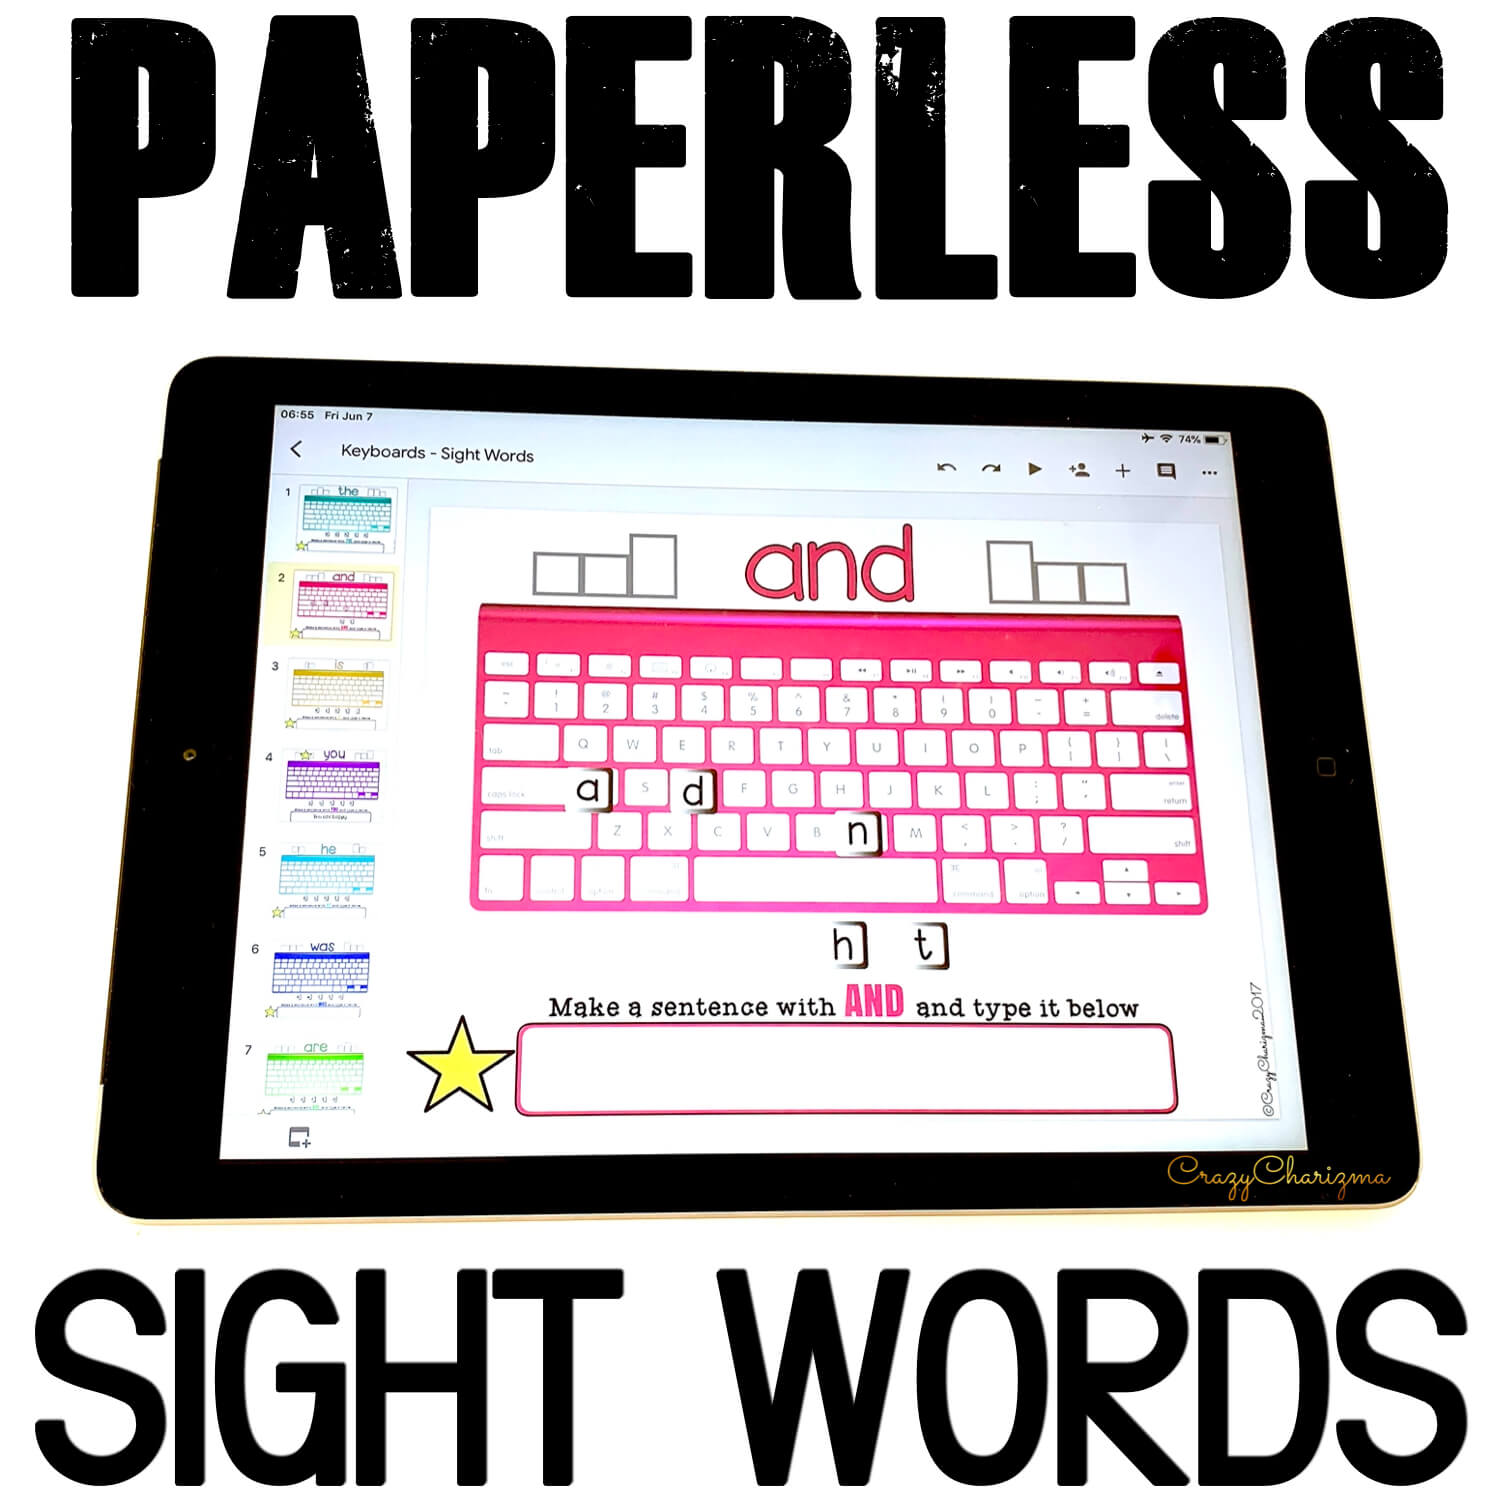 Grab paperless resources to practice sight words in a fun way. Let kids get engaged with word work and play with high-frequency words. They will love typing words, learn the keyboard, and build sentences.